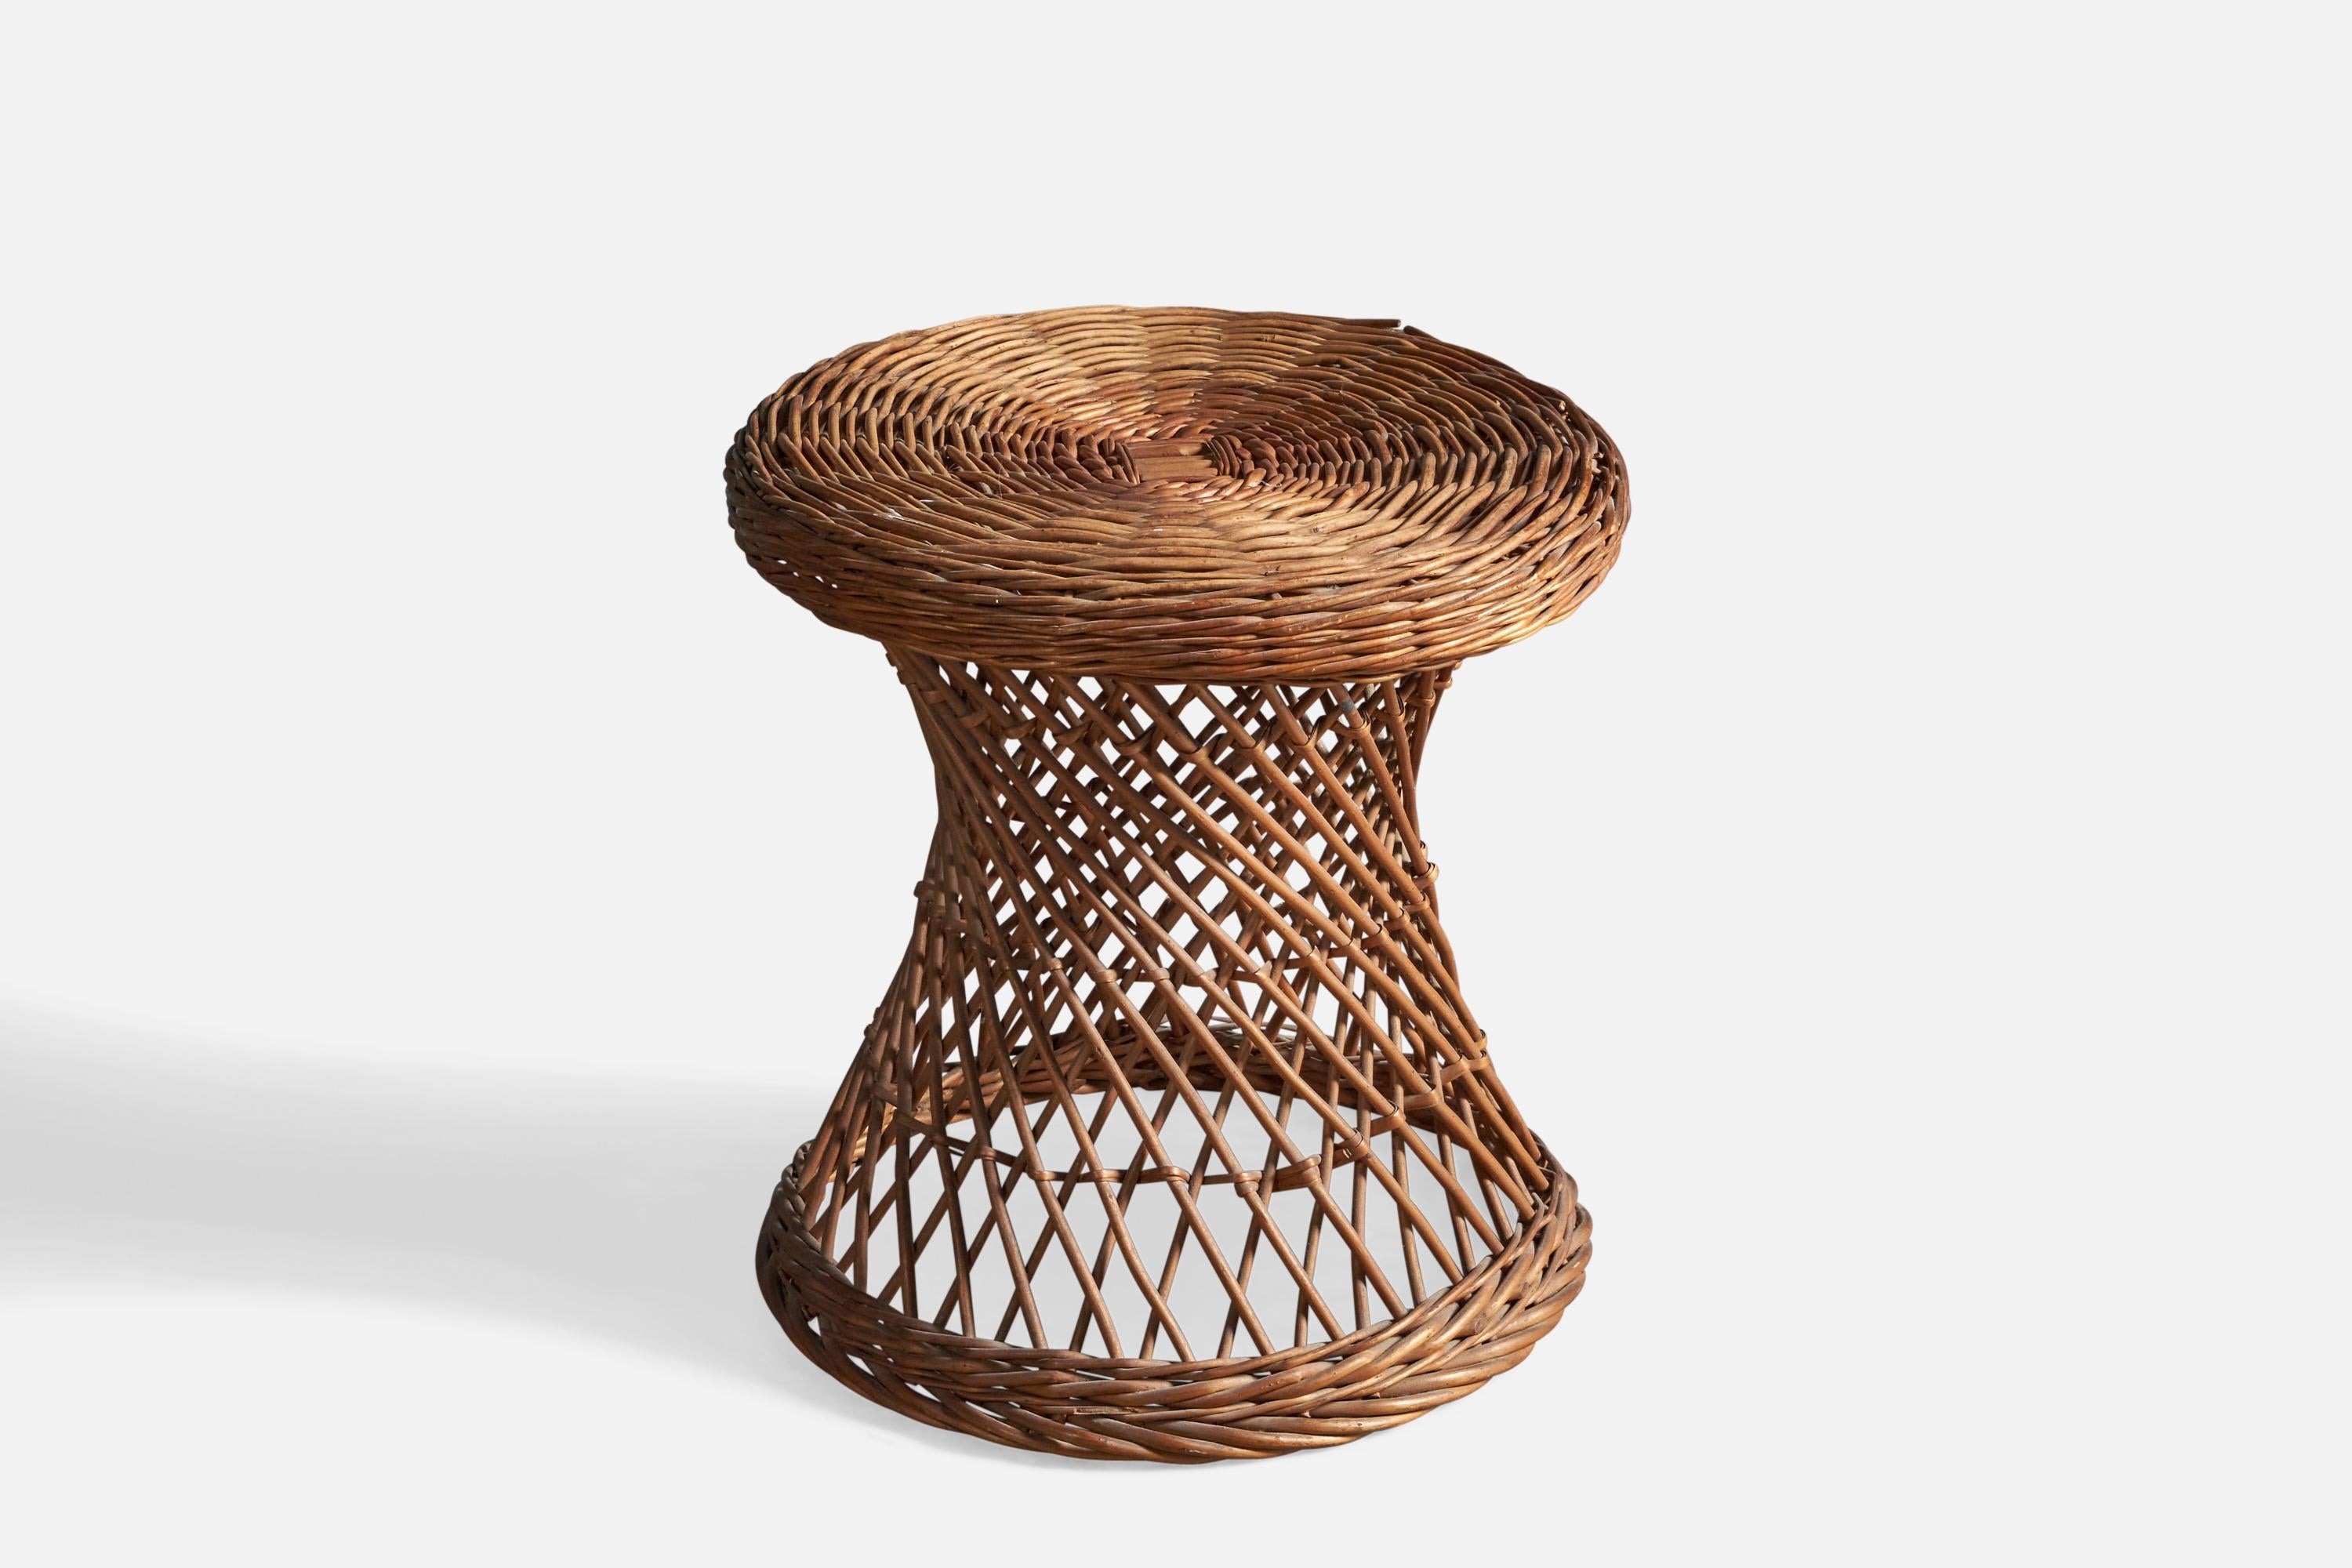 A rattan or wicker stool, designed and produced in Italy, c. 1970s.